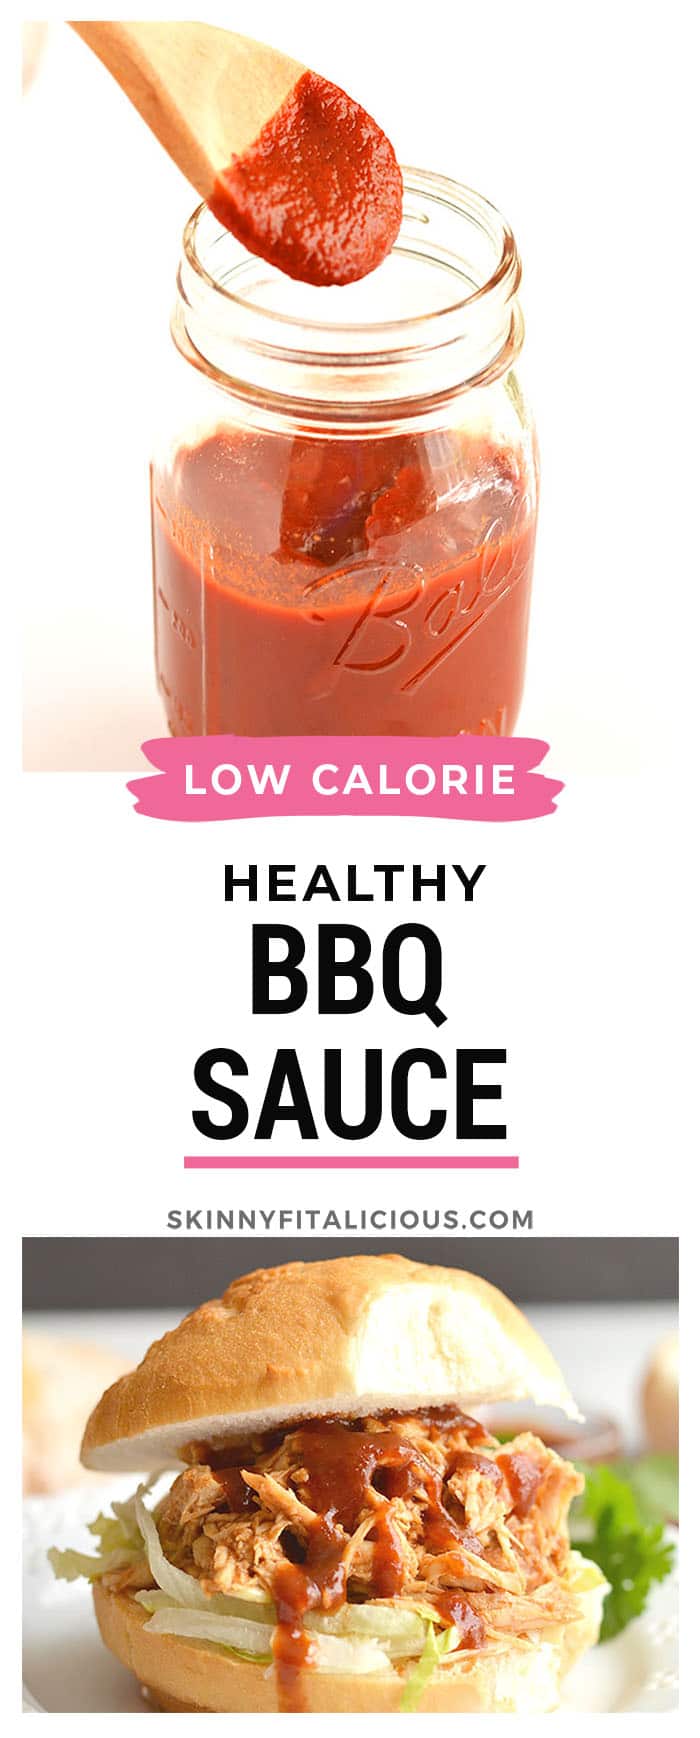 This Low Sugar BBQ Sauce is sweet, smoky, tangy and super tasty! Made low in sugar with wholesome ingredients. Incredibly easy to make too! Perfect for salads, grilling, baking, or the crockpot!